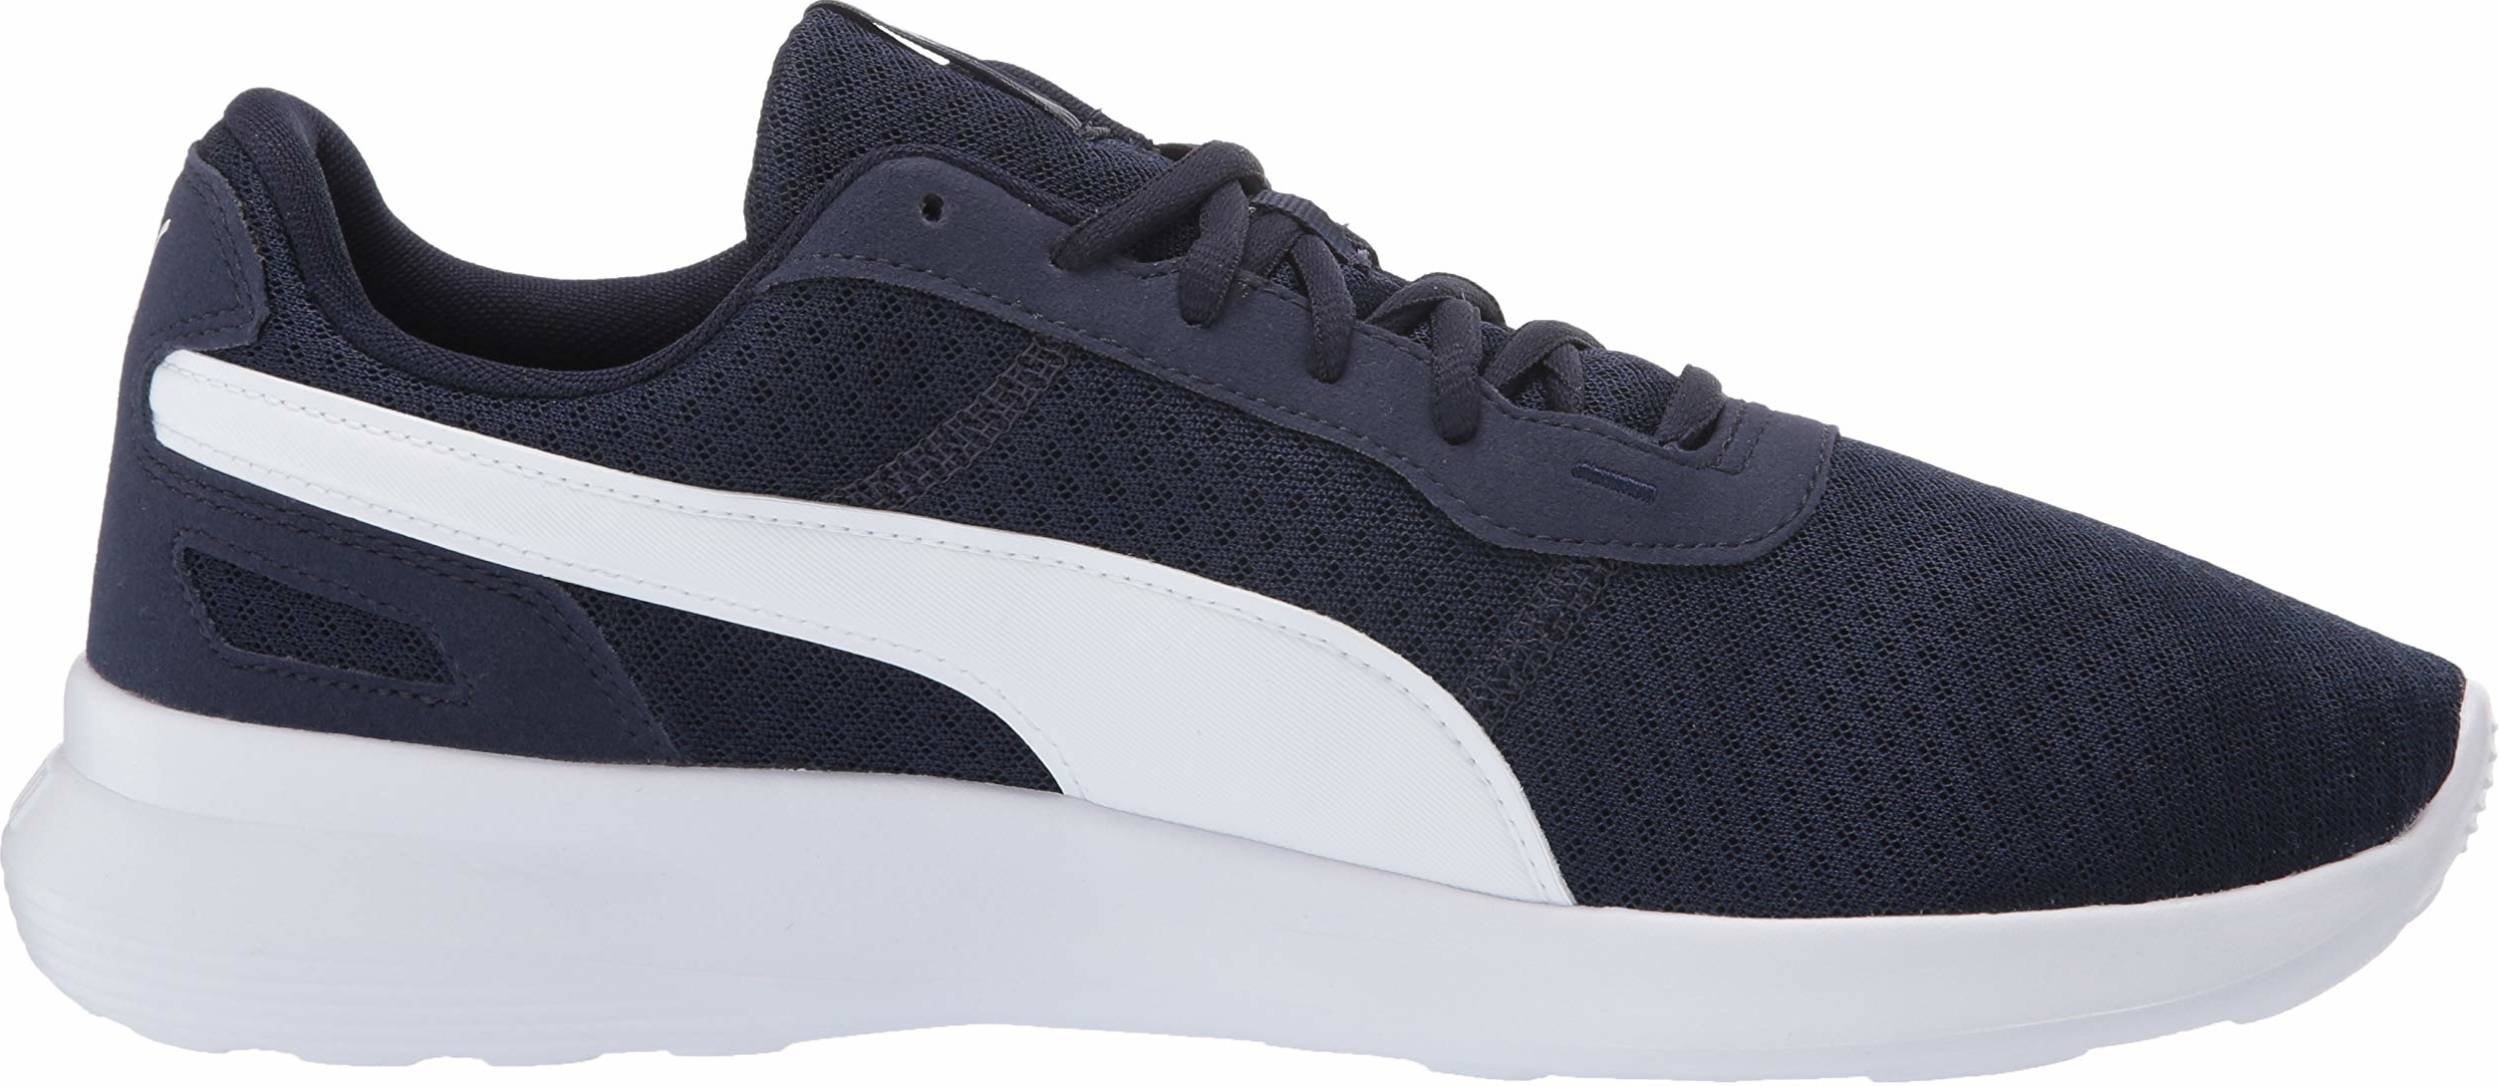 Only $24 + Review of Puma ST Activate 